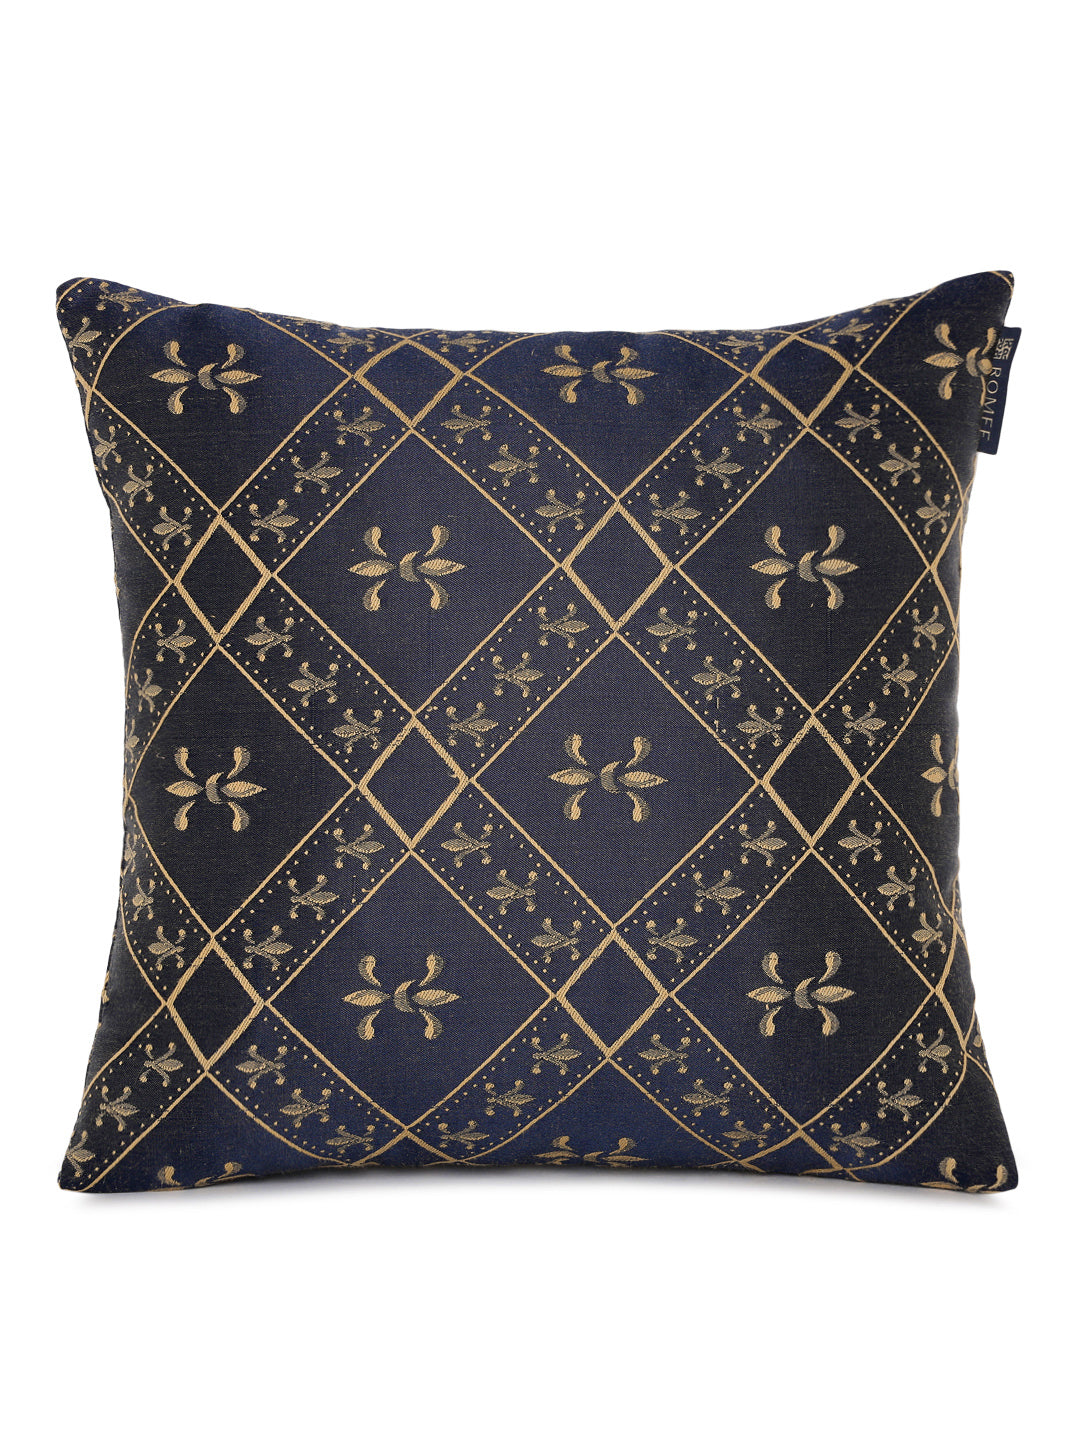 Soft Poly Cotton Ethnic Motifs Printed Cushion Covers 16x16  Set of 5 - Navy Blue